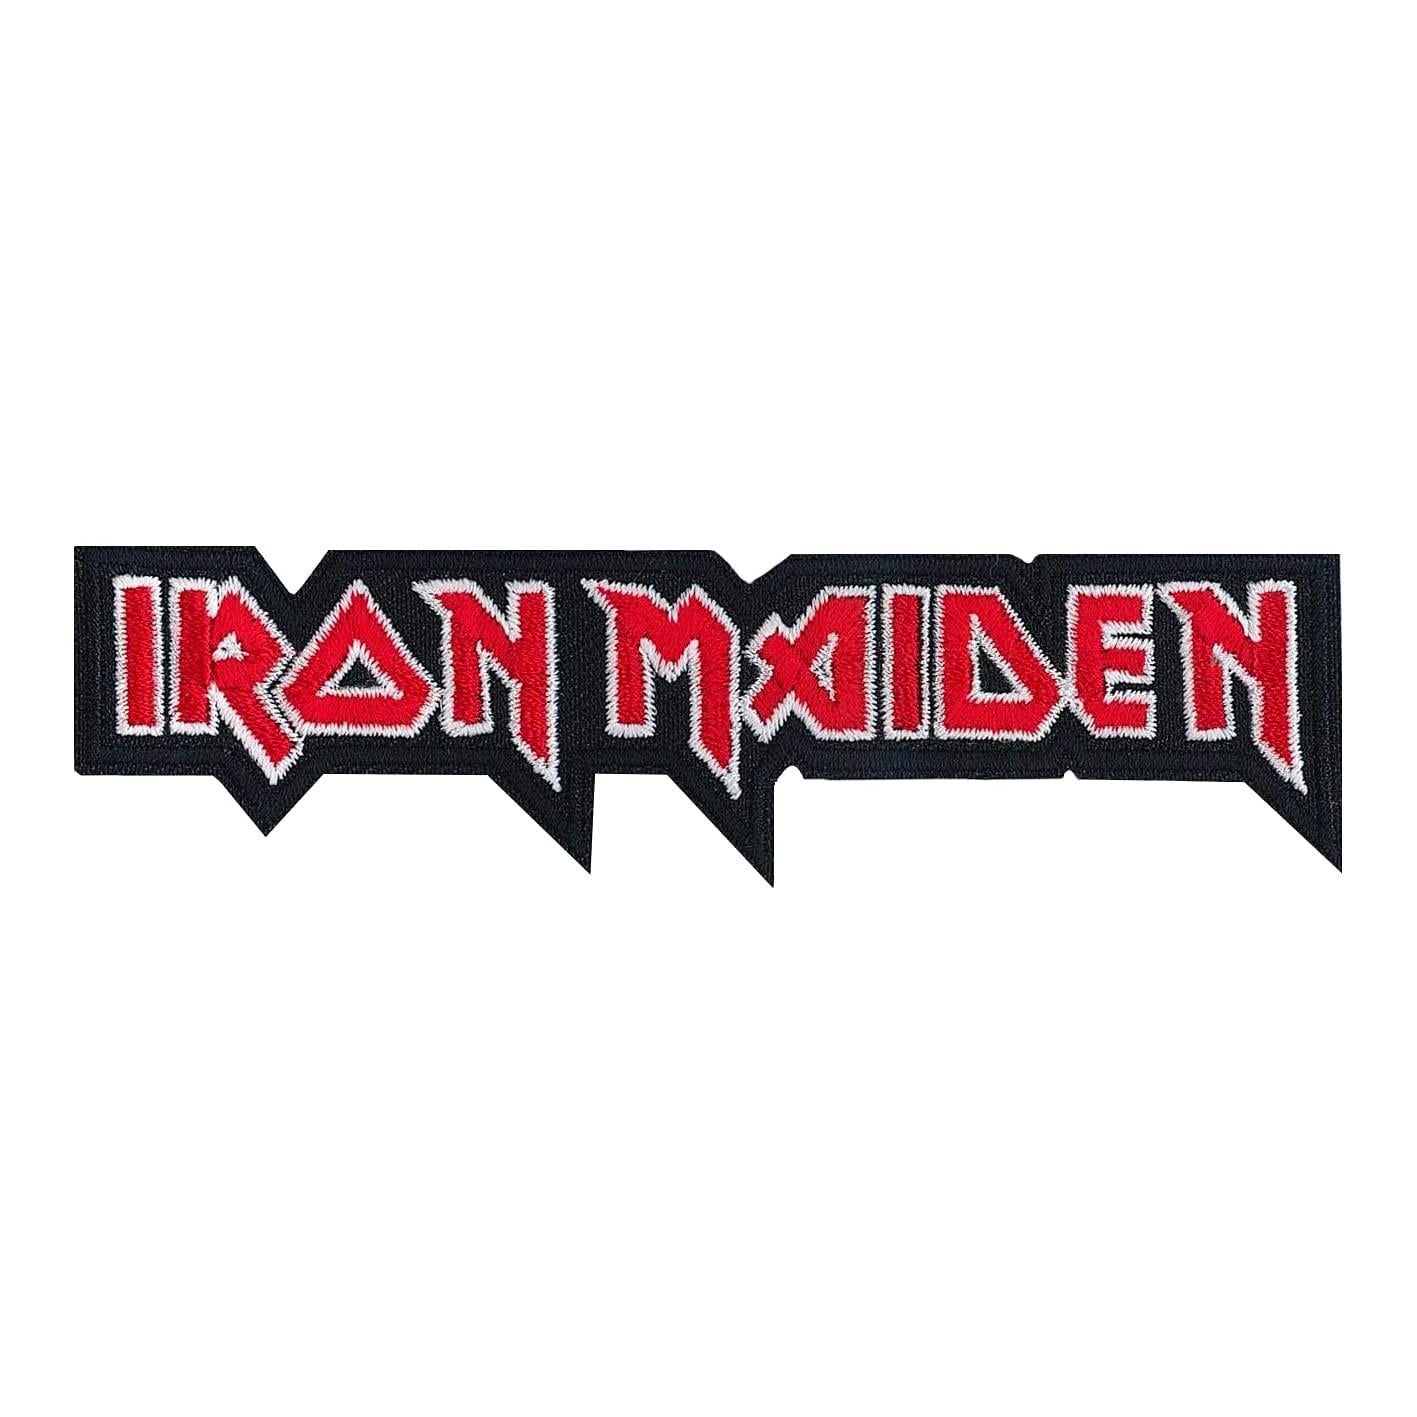 C&D Visionary Iron Maiden Logo Patch, Red, Black